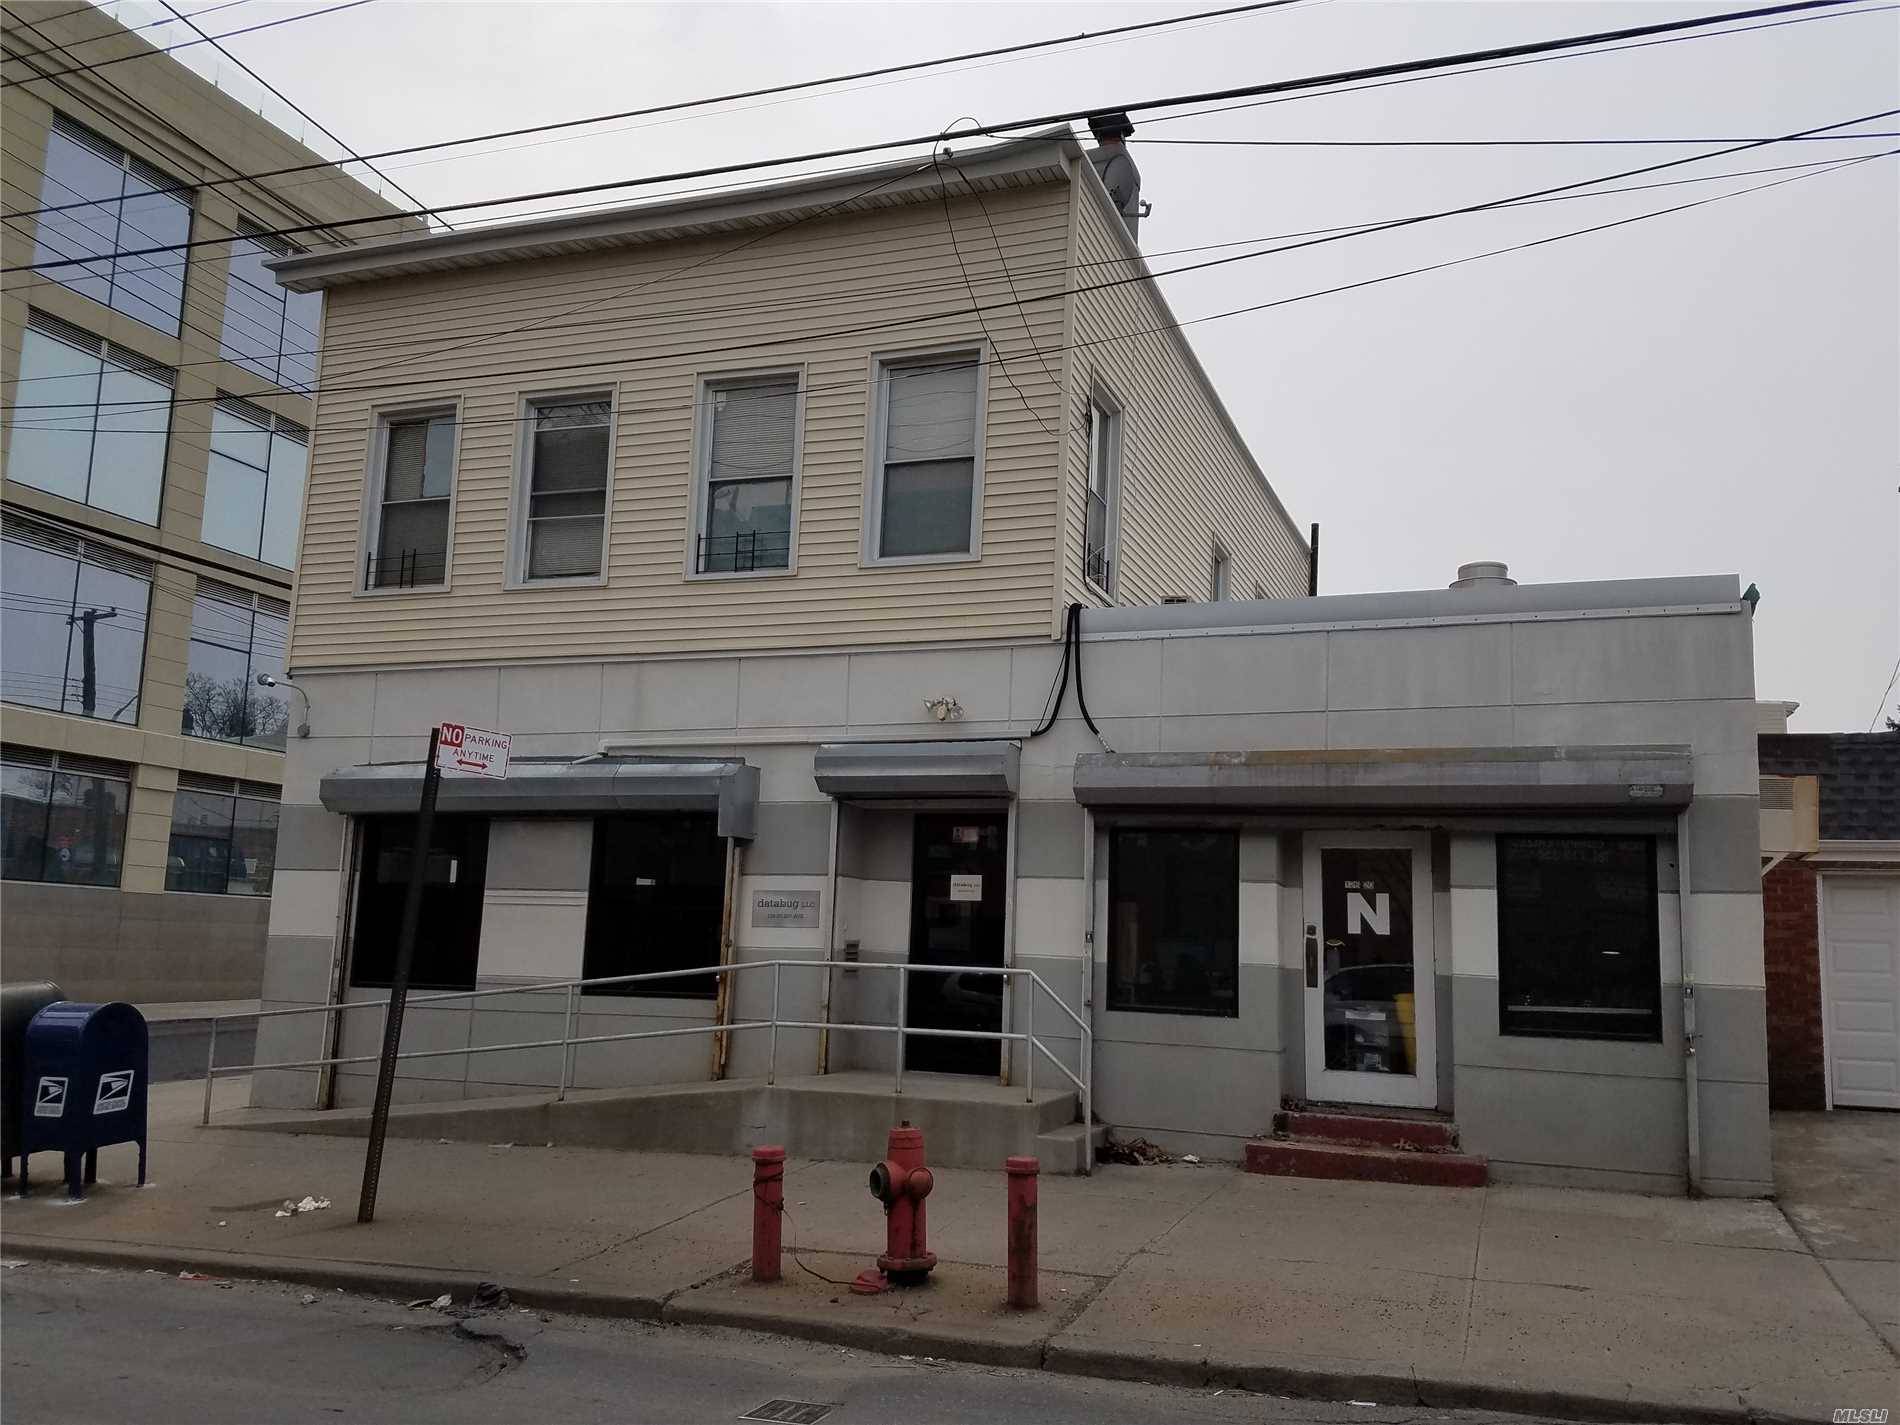 Storefront / Professional  Office  With Basement  For Lease In The Heart Of College Point..